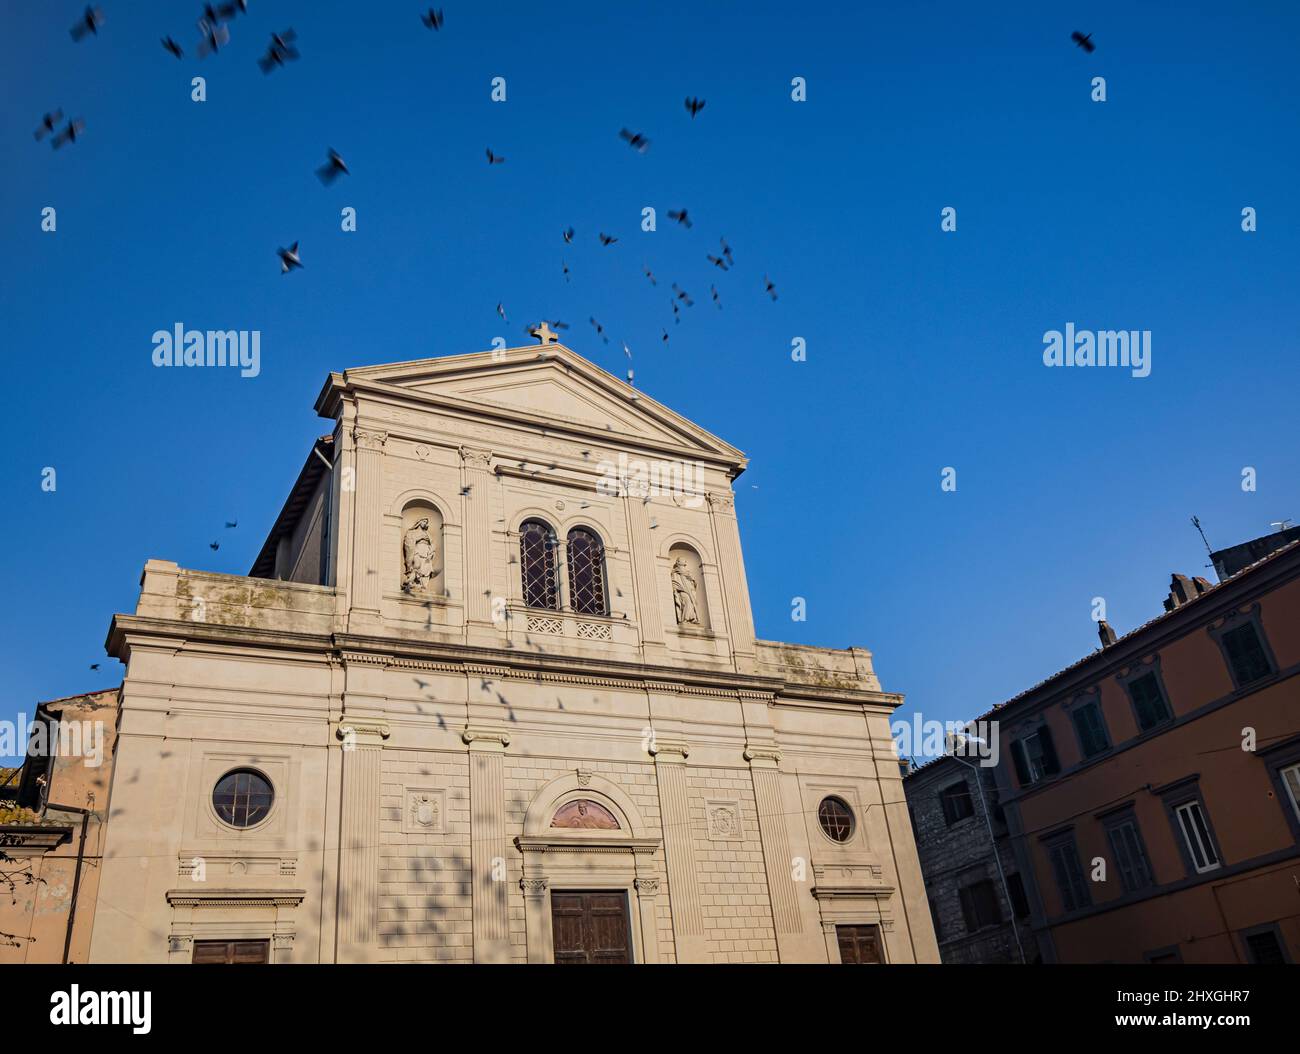 The village of Tarquinia, Viterbo, Lazio, Italy - The facade of the church of Saints Margherita and Martino. The mullioned window in the center and th Stock Photo